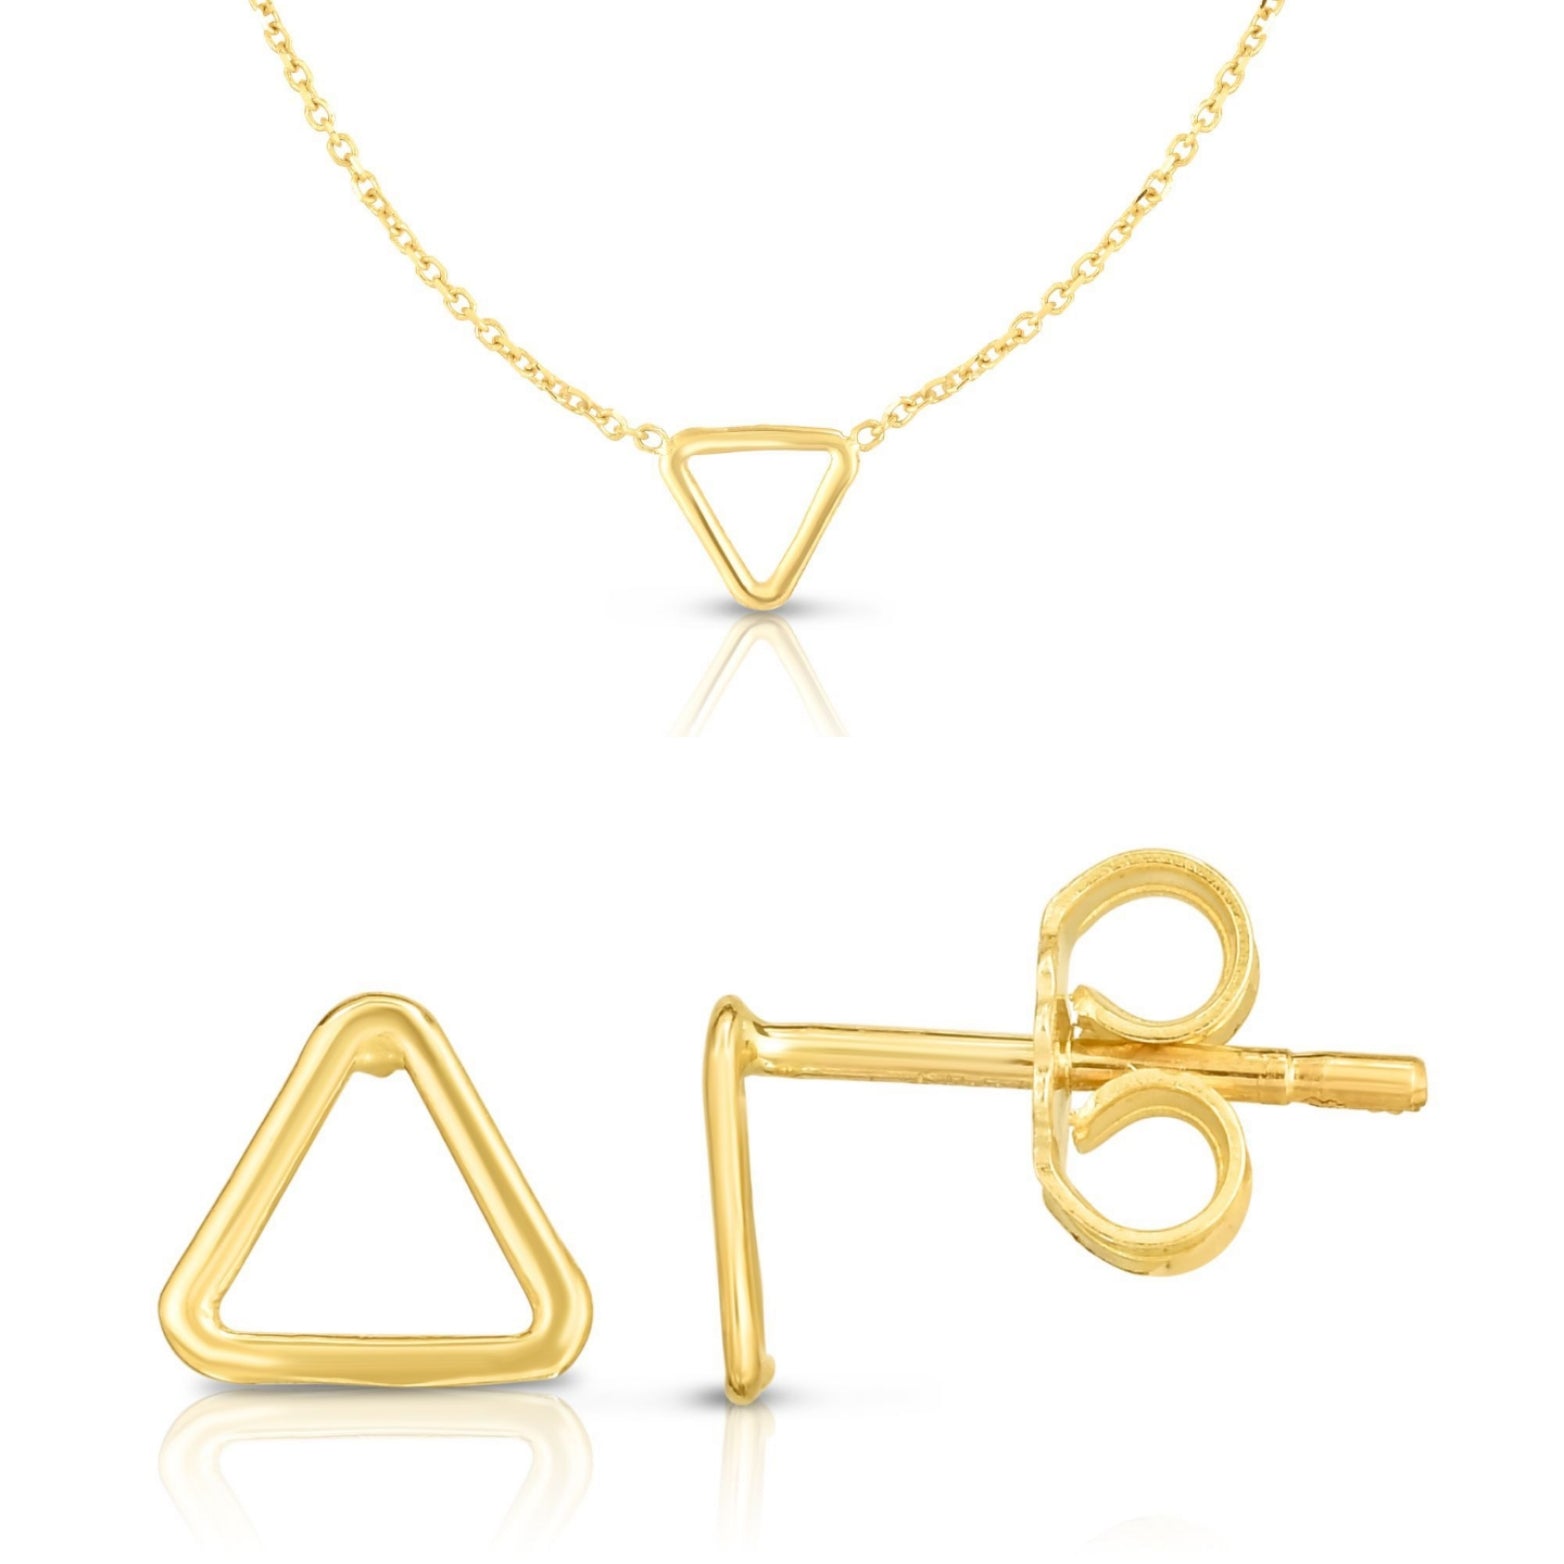 Minimalist Solid Gold Triangle, Tribe Necklace or Earrings or Set - wingroupjewelry